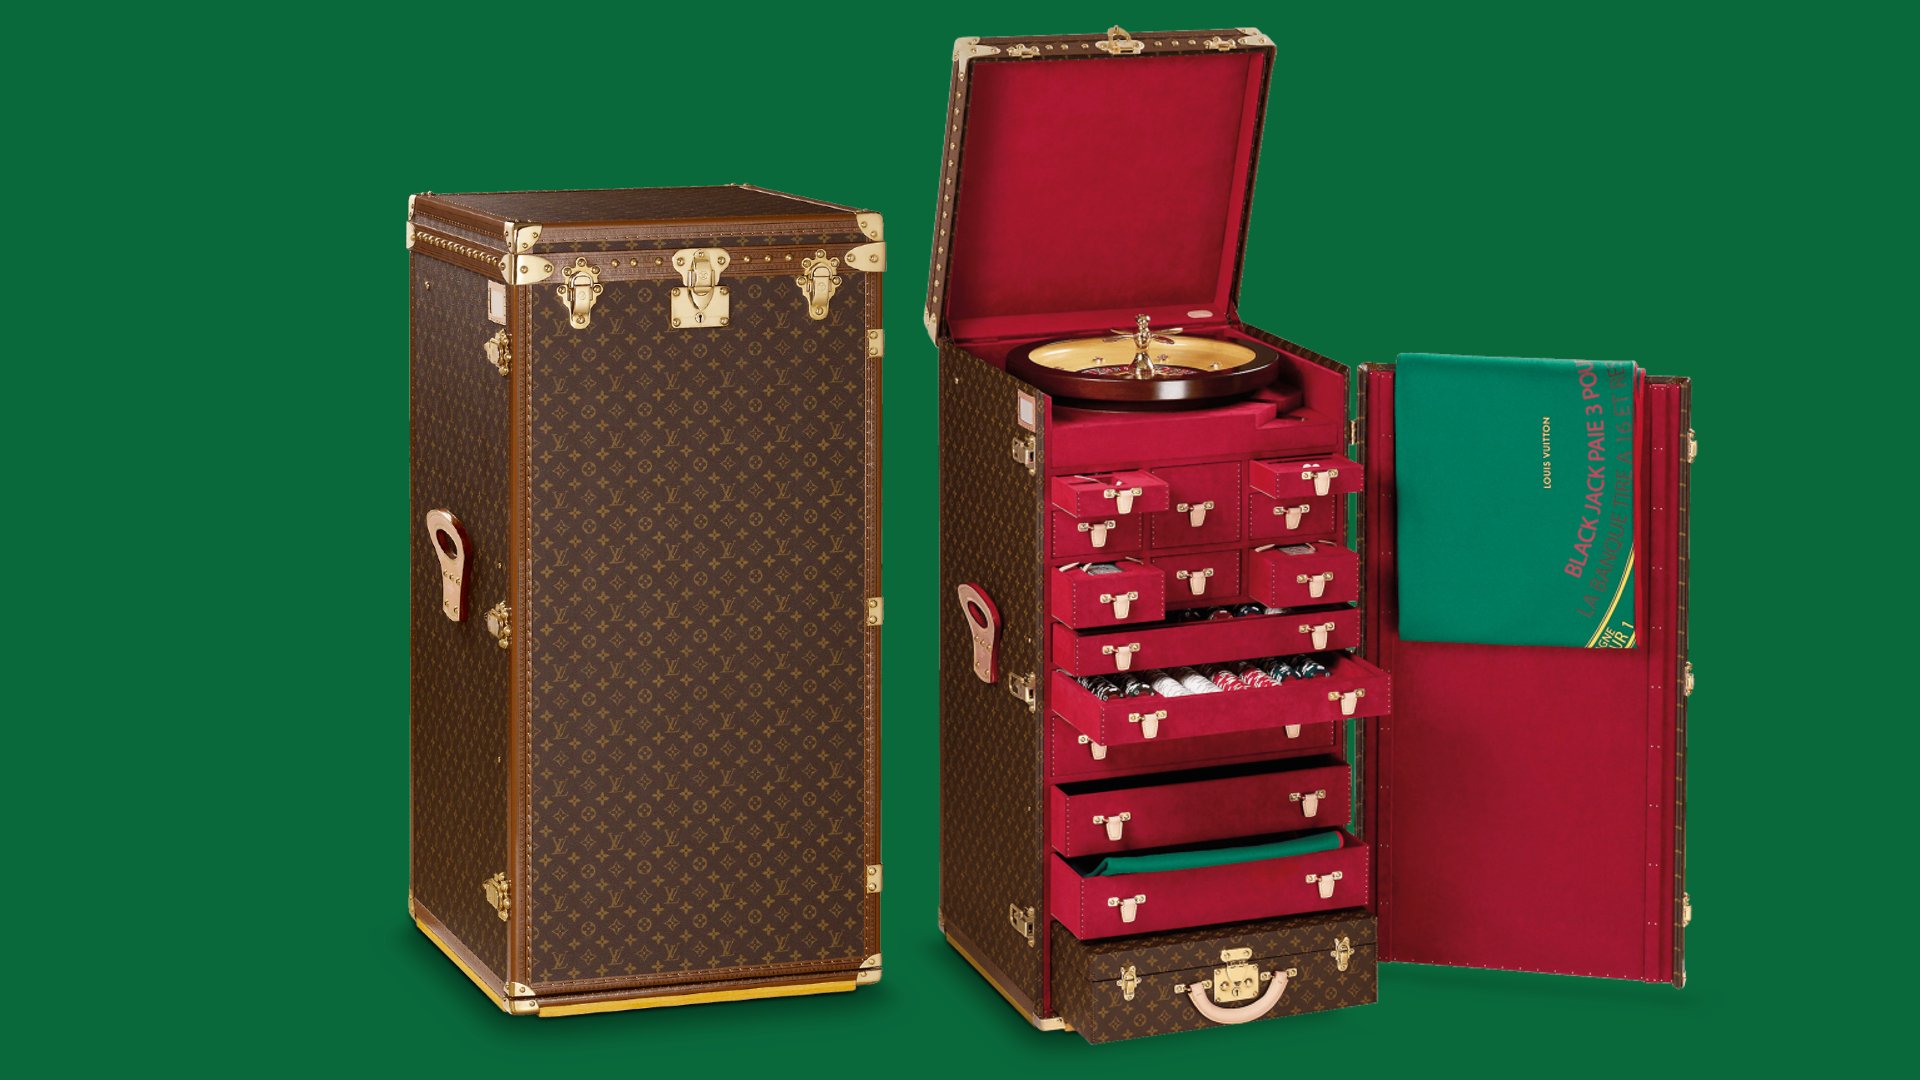 Luxury Gaming Stations: The Louis Vuitton Casino Trunk Lets You